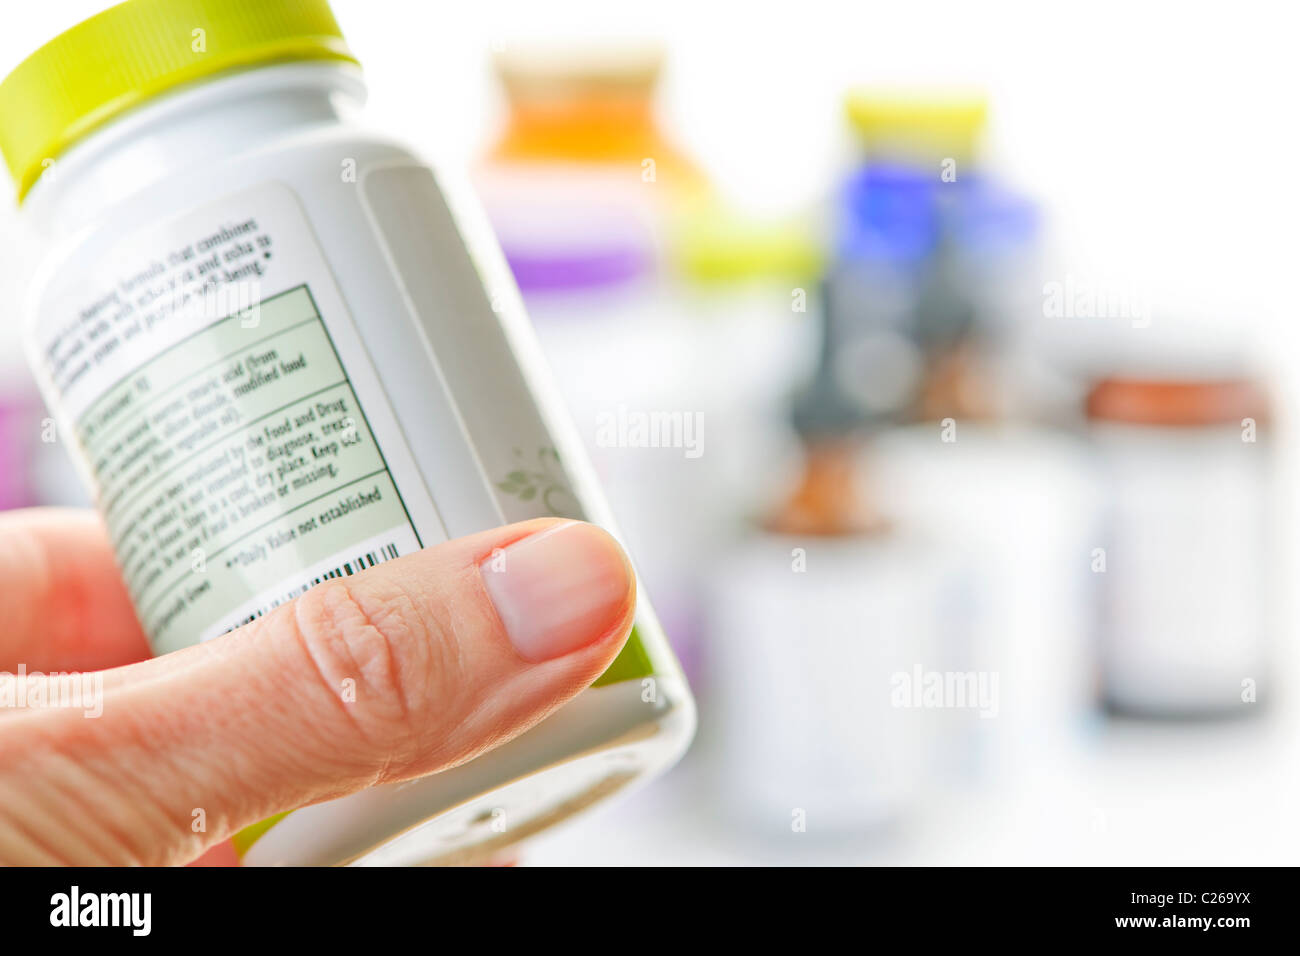 Hand holding medicine bottle to read label Stock Photo